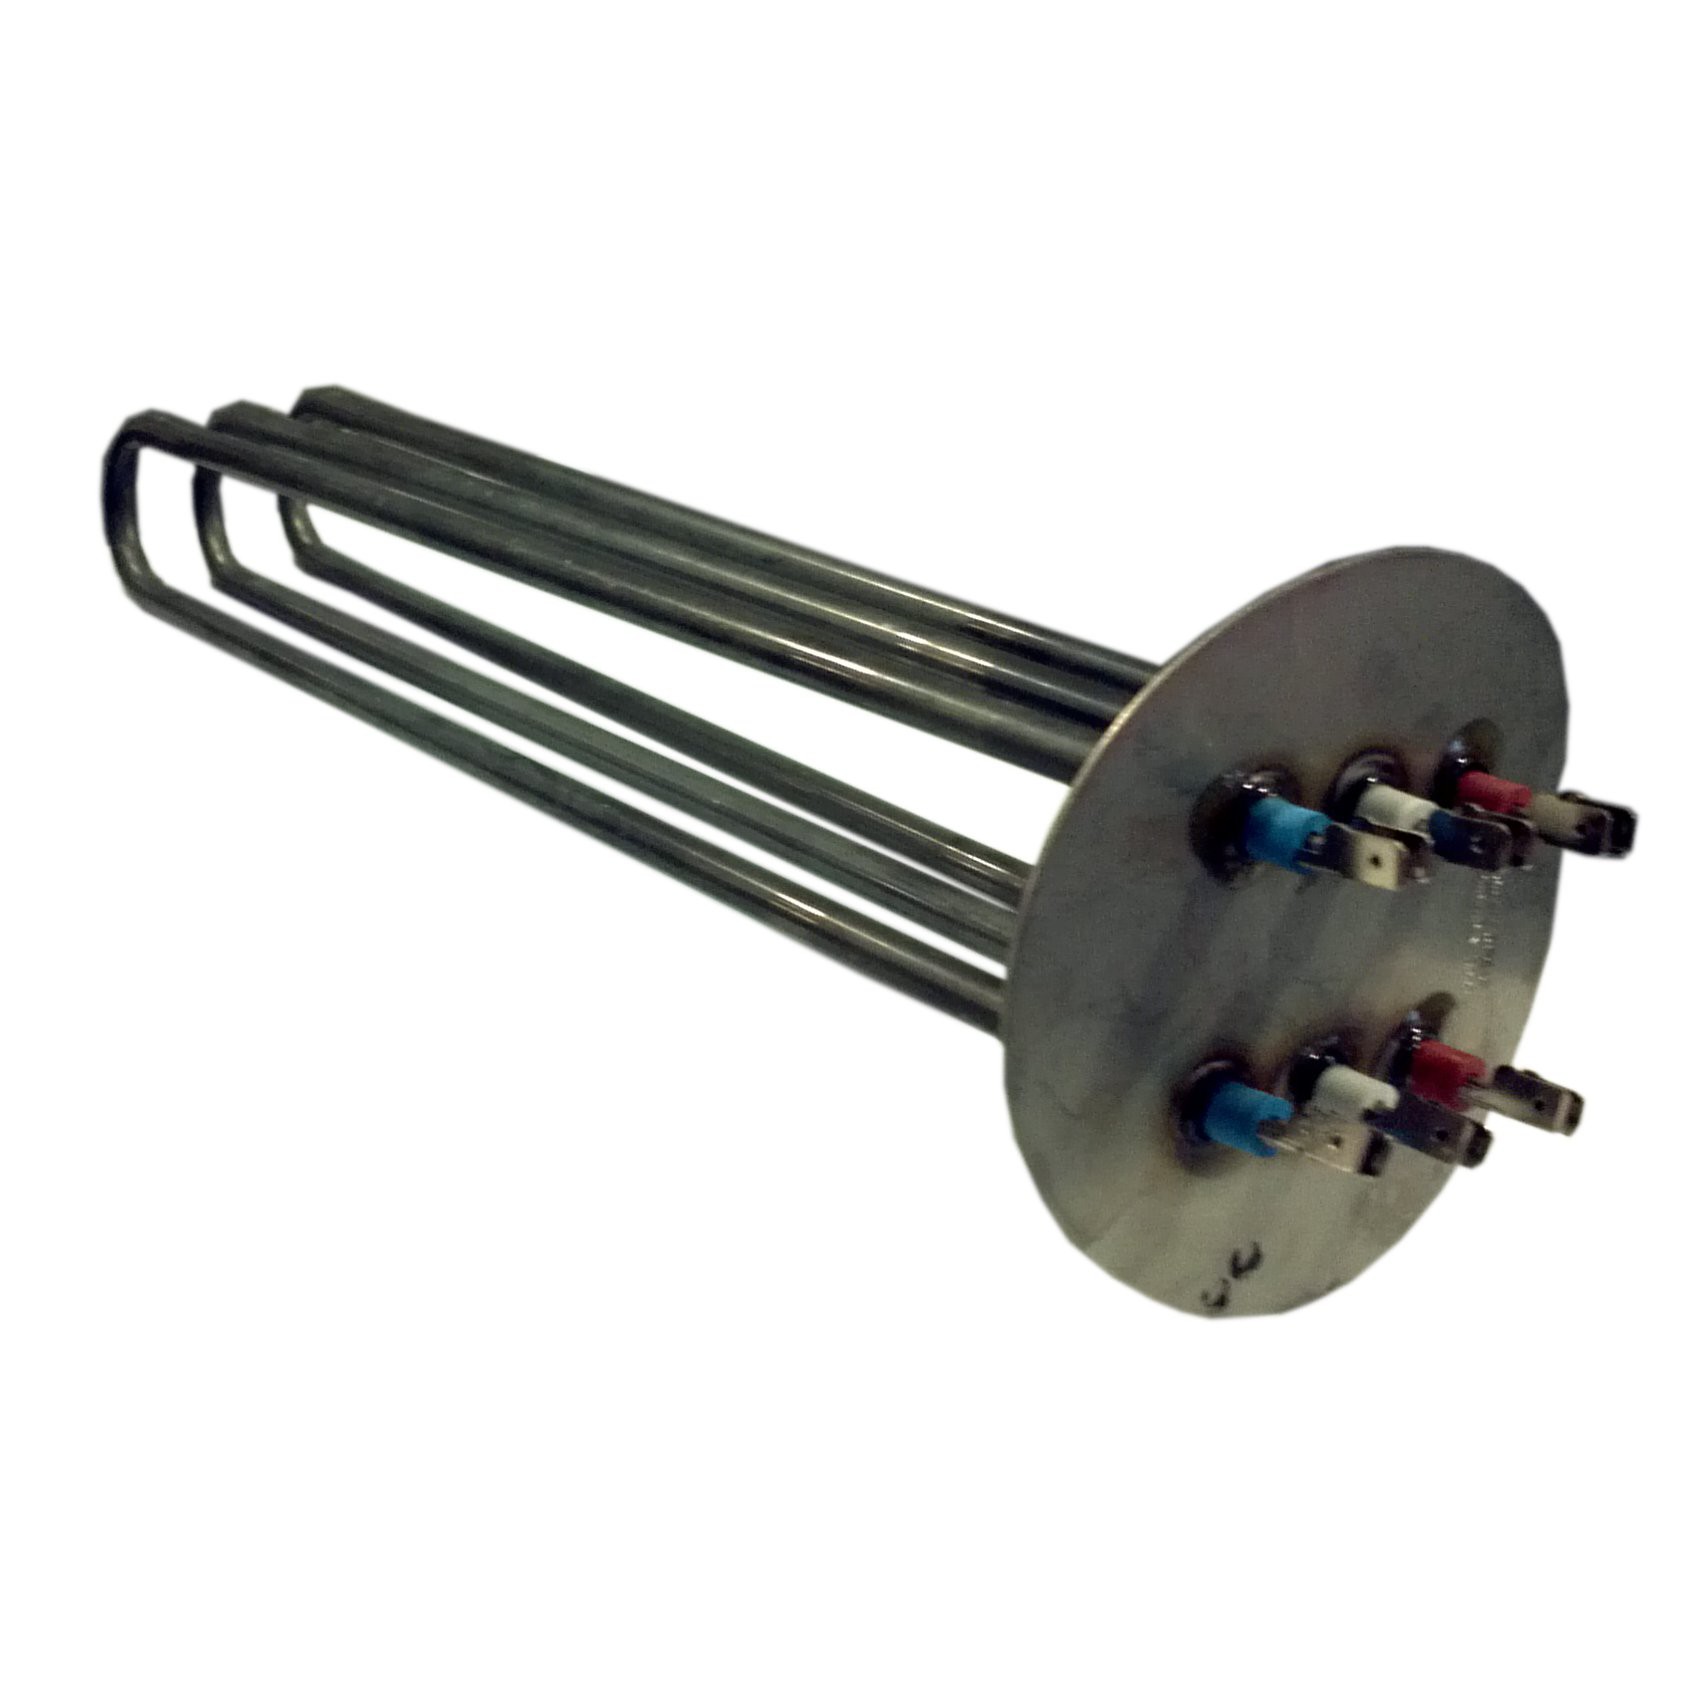 Three-phase immersion heater, all current 5000W - 230/400V (Curved flange)